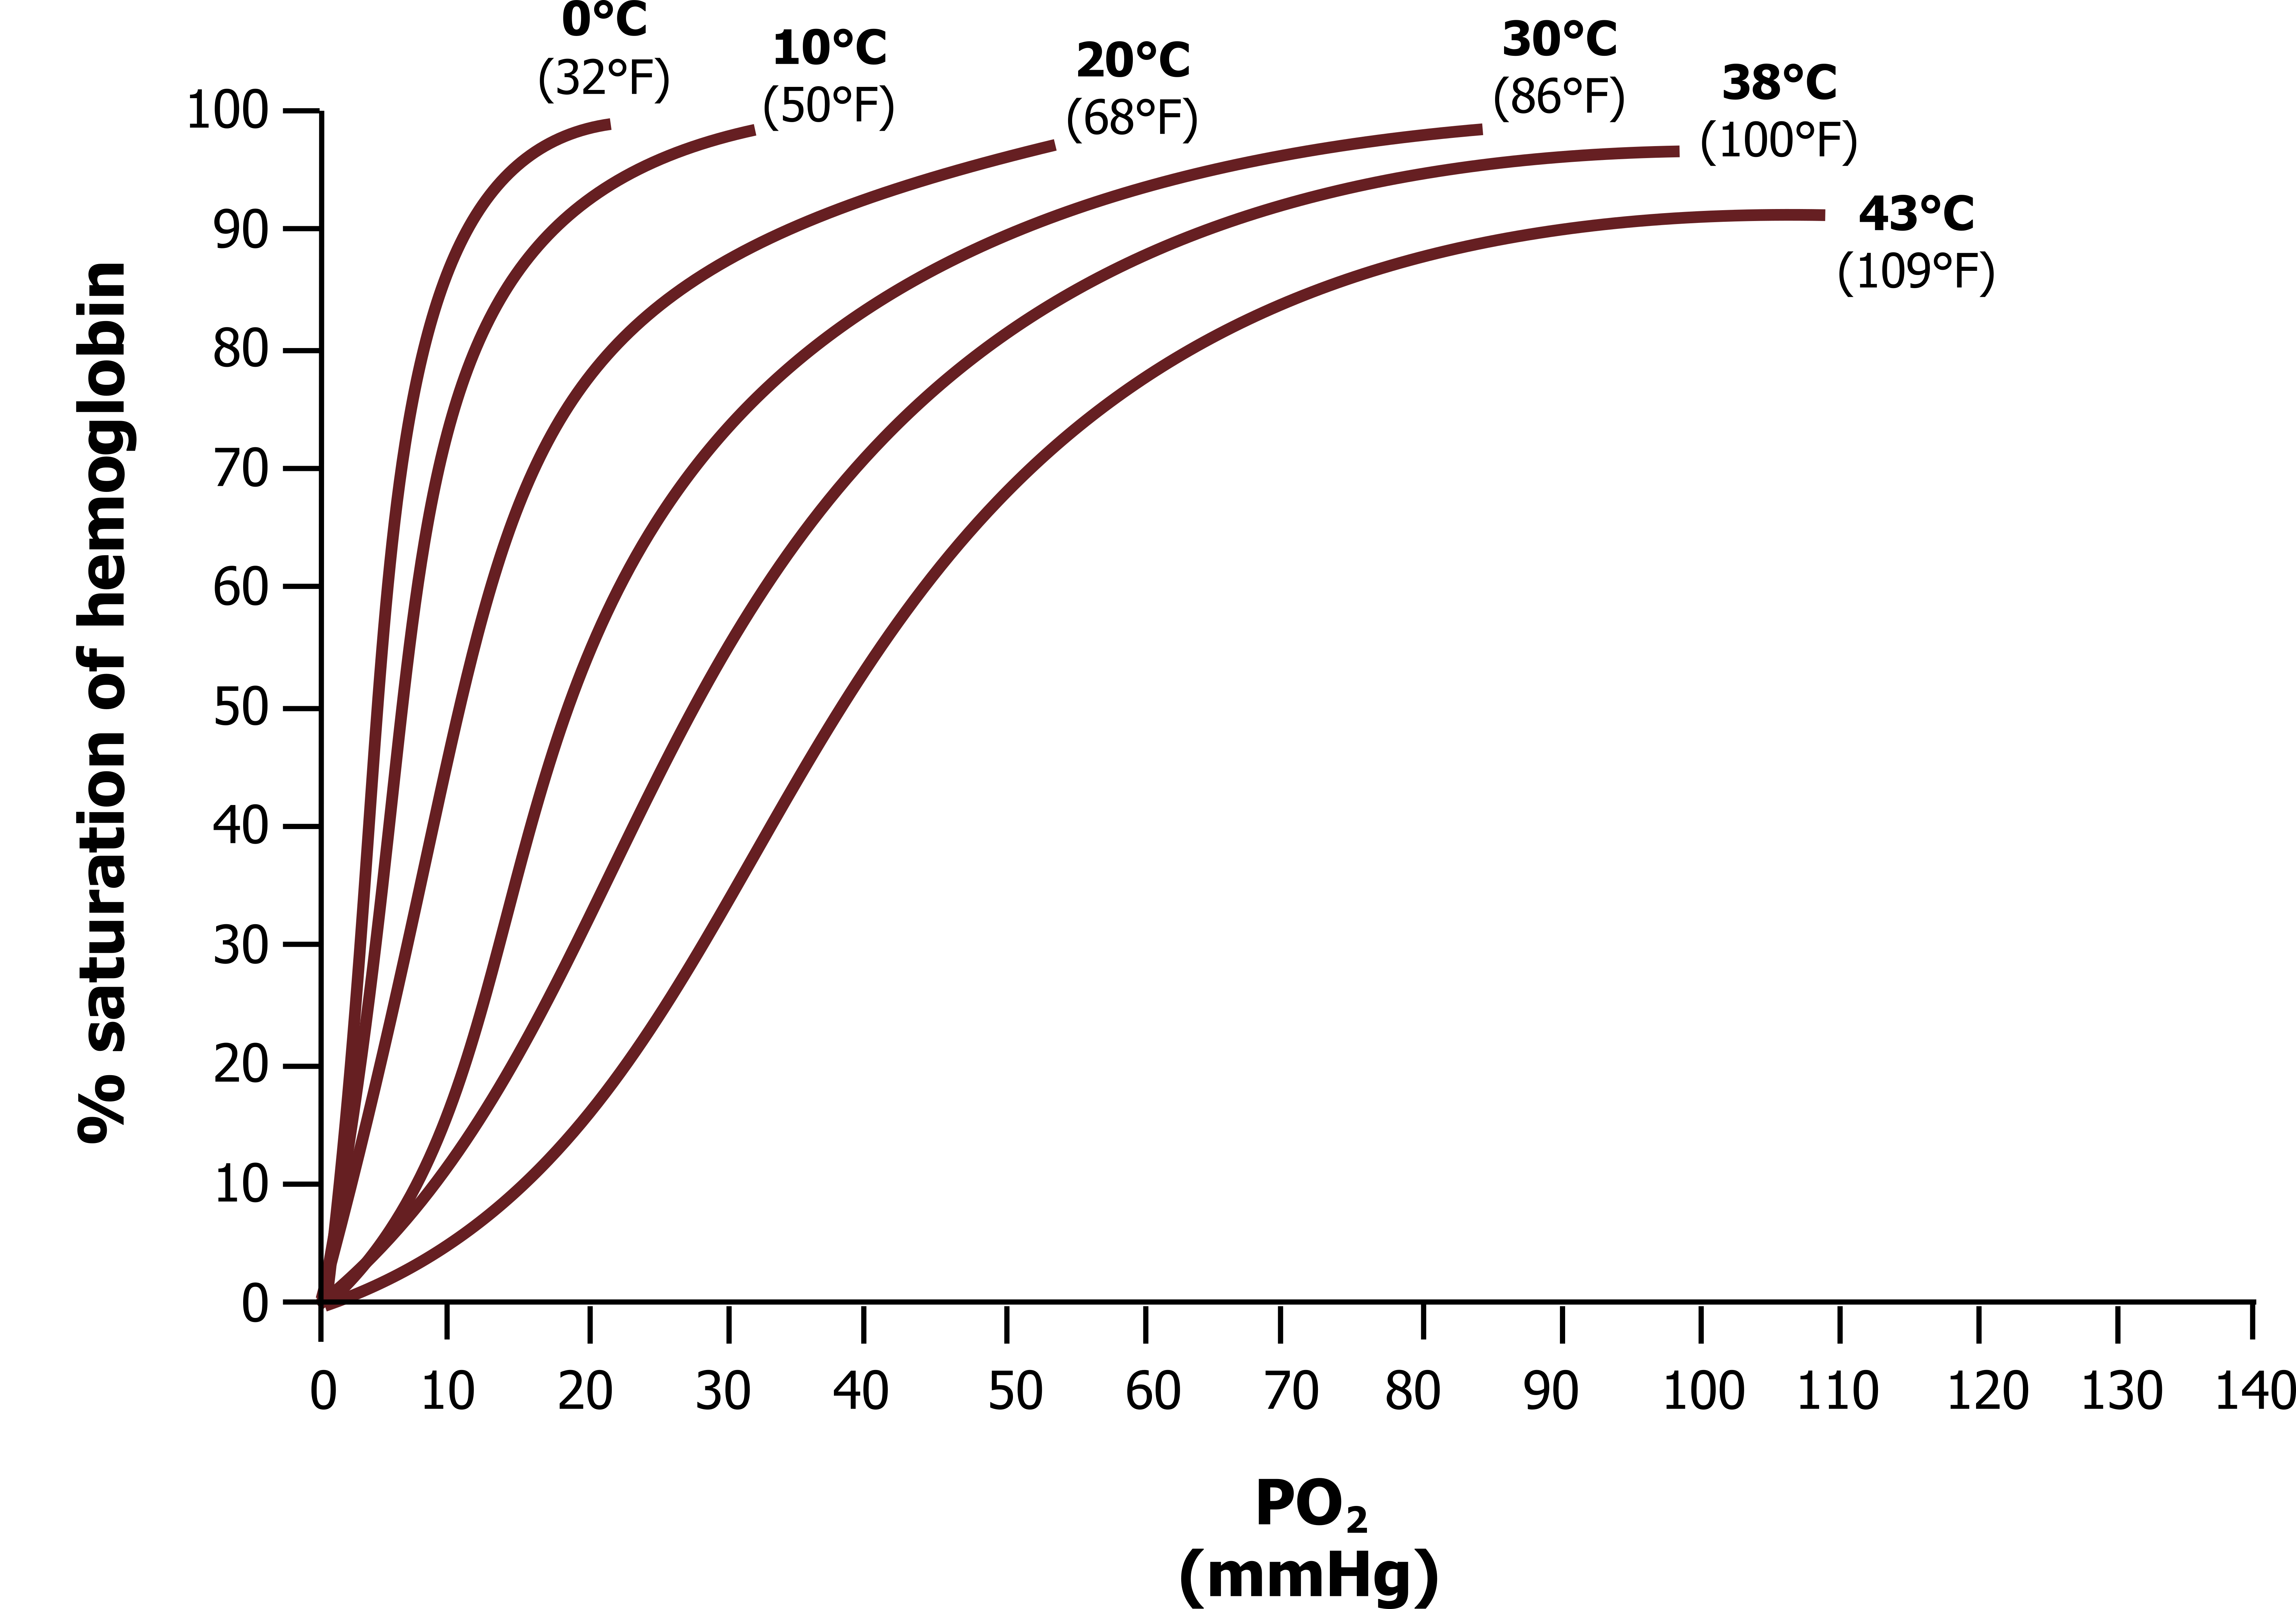 Graph with y-axis labeled % saturation of hemoglobin ranging from 0 to 100 and x-axis labeled P O2 (mmHg) ranging from 0 to 140. Oxyhemoglobin dissociation at various temperatures. 6 curves labeled with differing temperatures, all beginning at (0,0). 0℃ ends at (20, 99). 10℃ ends at (32, 99). 20℃ ends at (53, 98). 30℃ ends at (85, 98). 38℃ ends at (98, 96). 43℃ ends at (109, 90). All values are approximate.